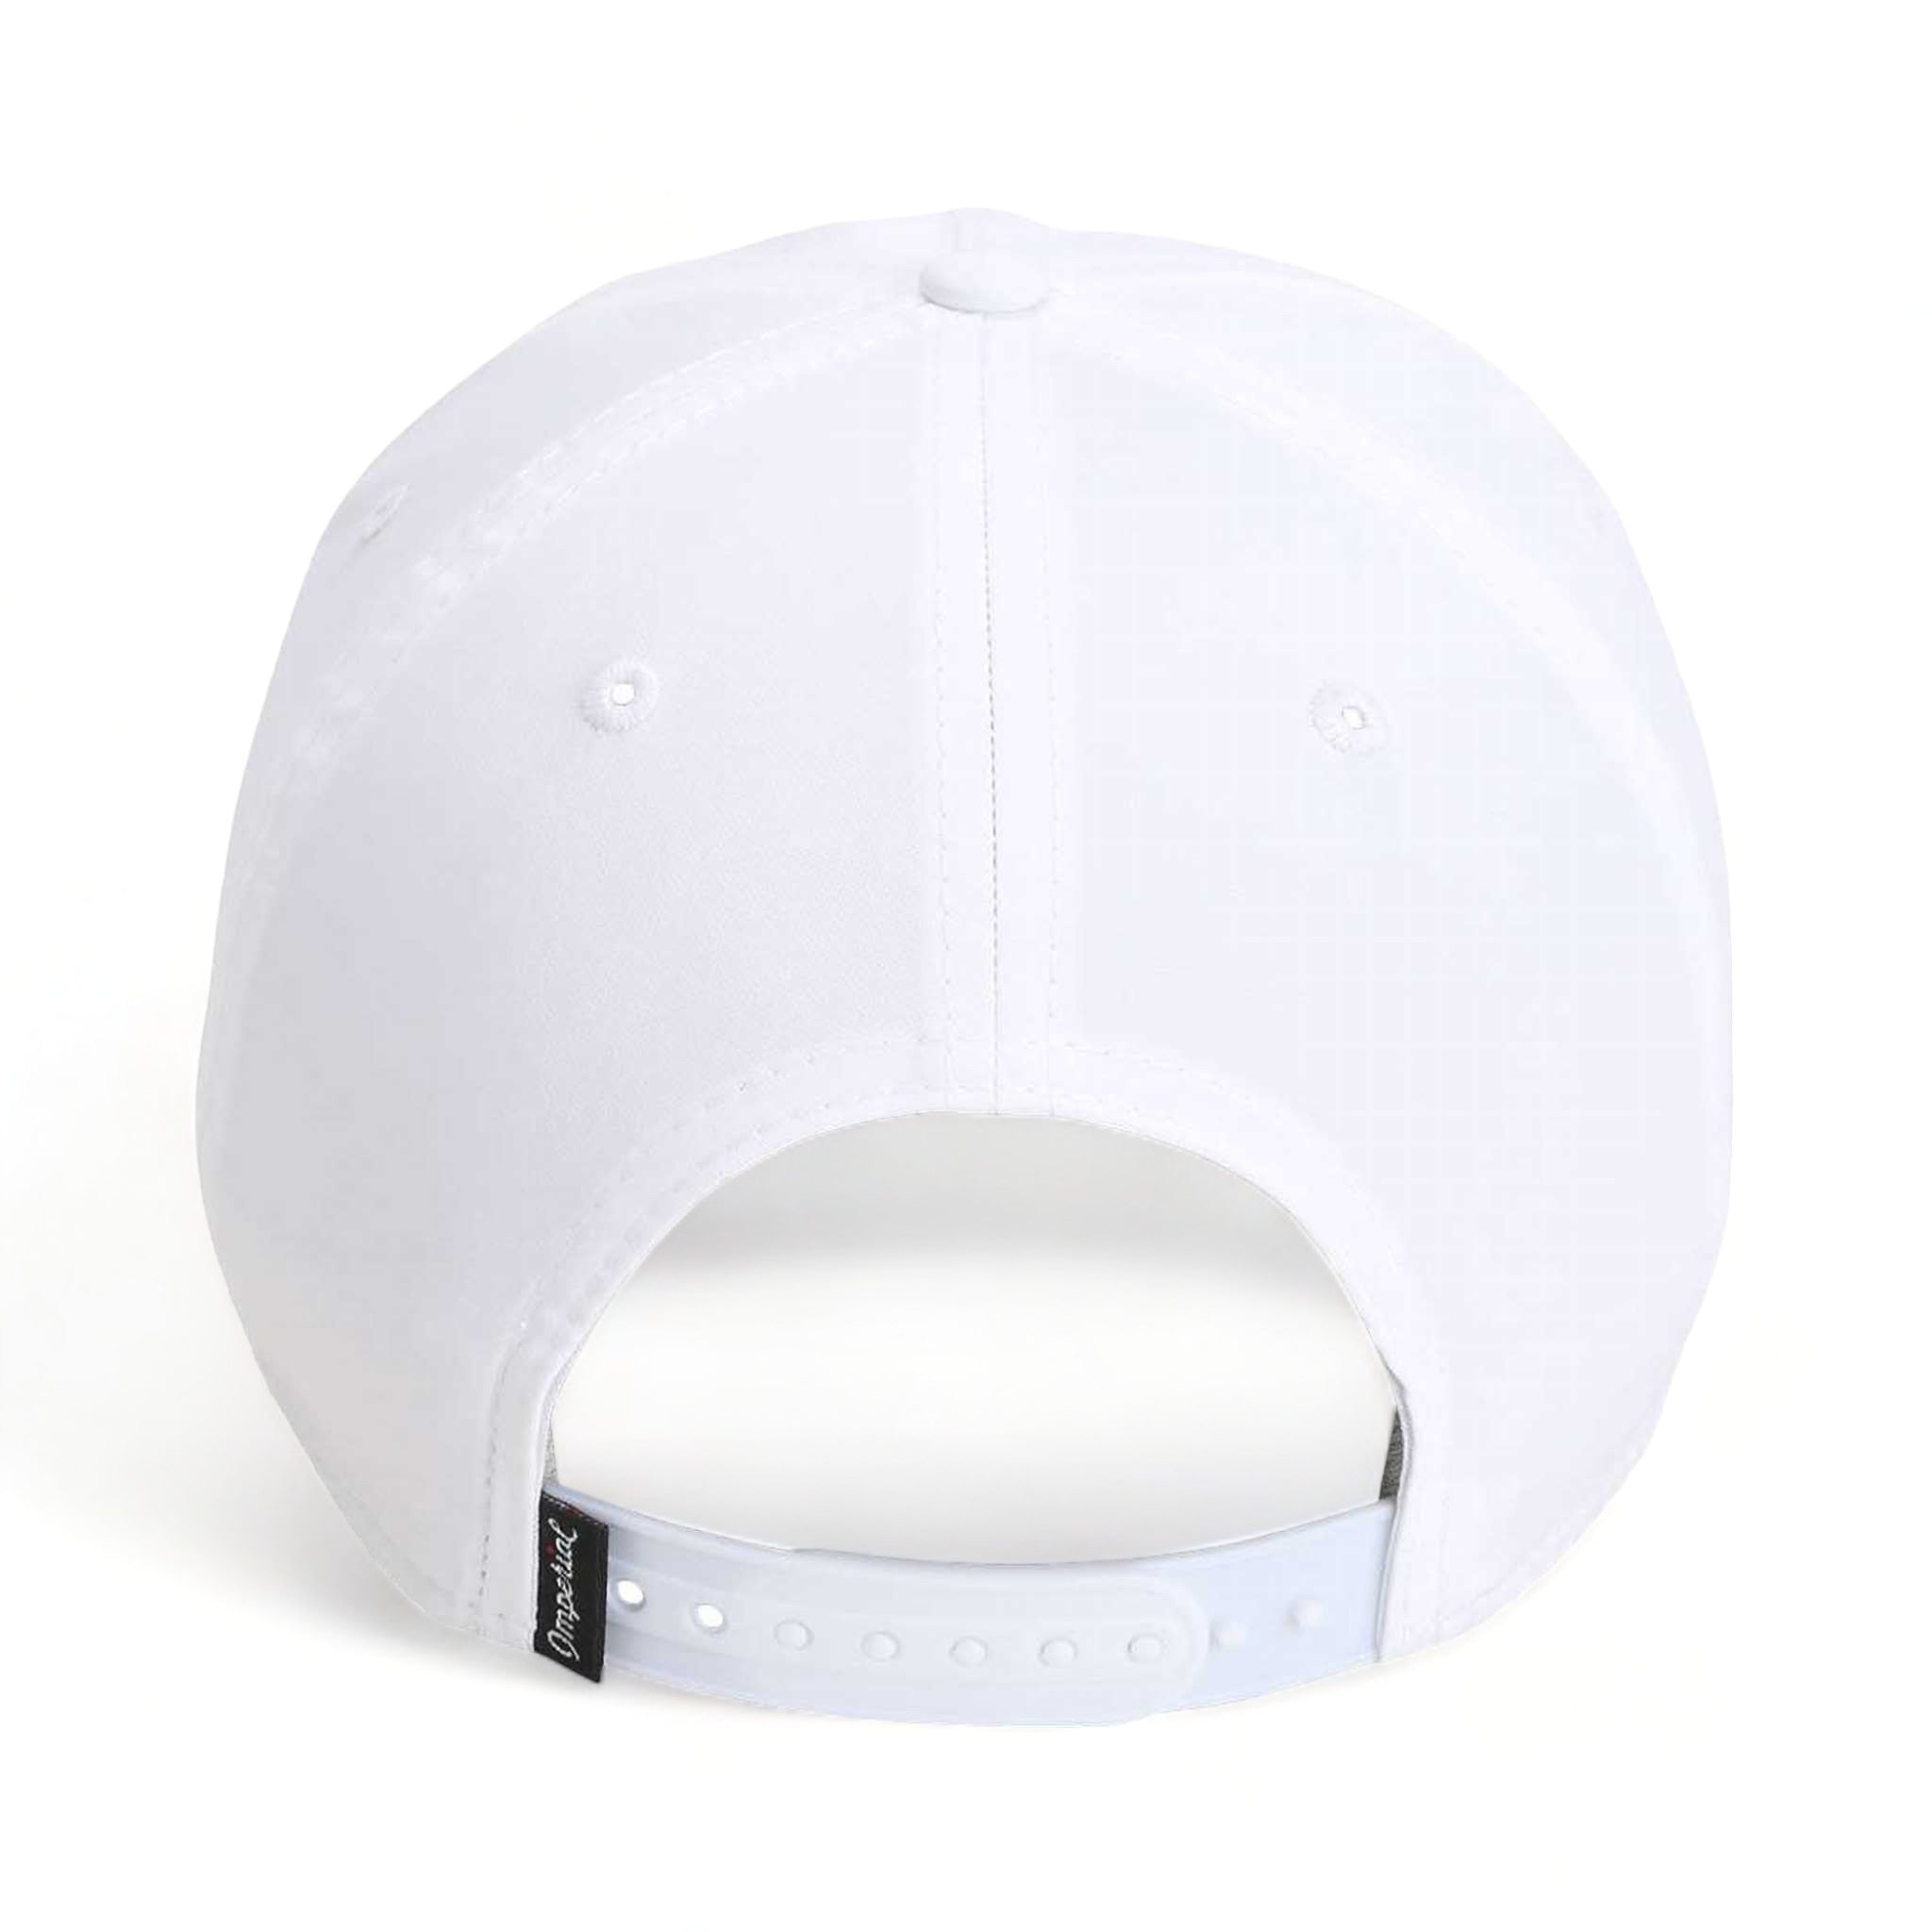 Back view of Imperial 5054 custom hat in white and red